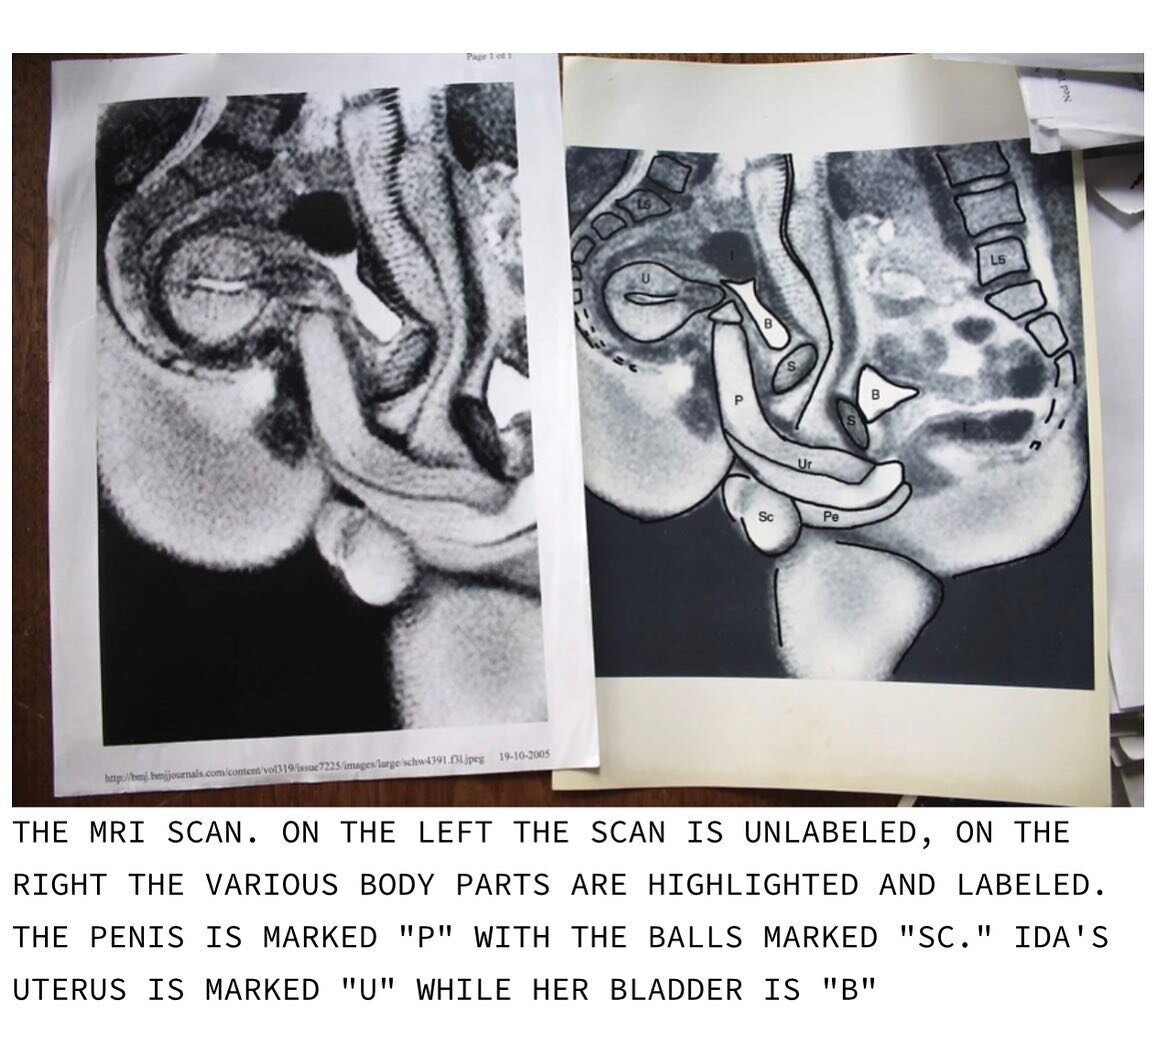 This is the first ever image of a cis-hetero couple shagging in an MRI machine, for science and our curiosities in 1991. Thank you science ❤️&zwj;🔥

These images are sourced from a Vice article about the couple&rsquo;s experience some 30 years ago.
